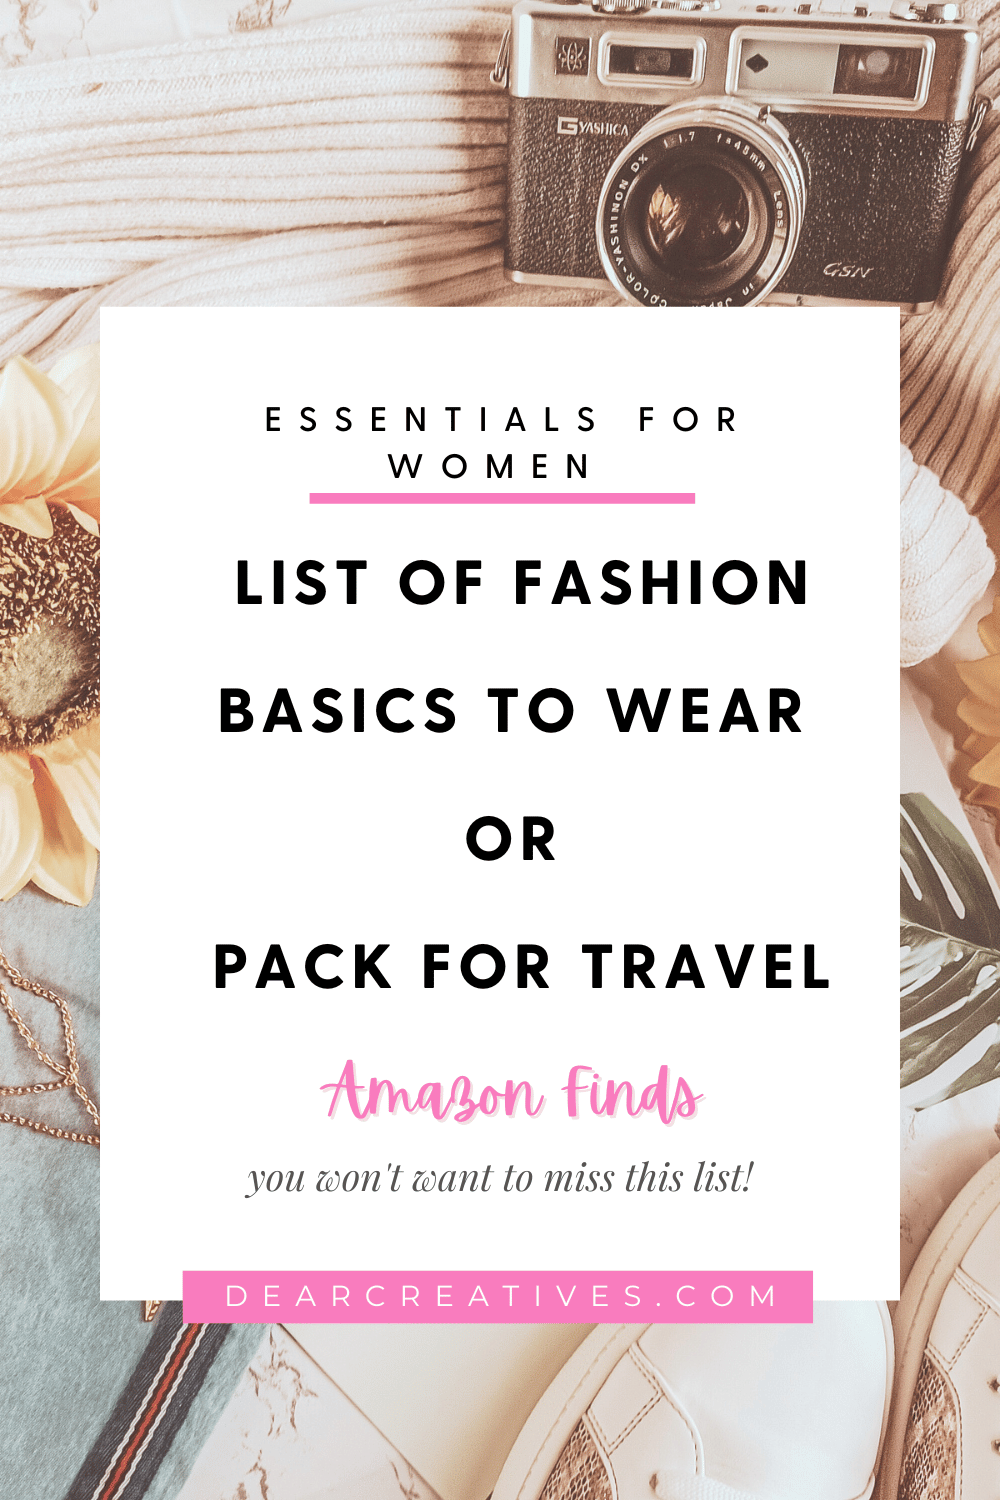 Essentials For Women - List of fashion basics to wear or pack for travel. This is a must-have list you won't want to miss! See the Amazon finds curated at DearCreatives.com 